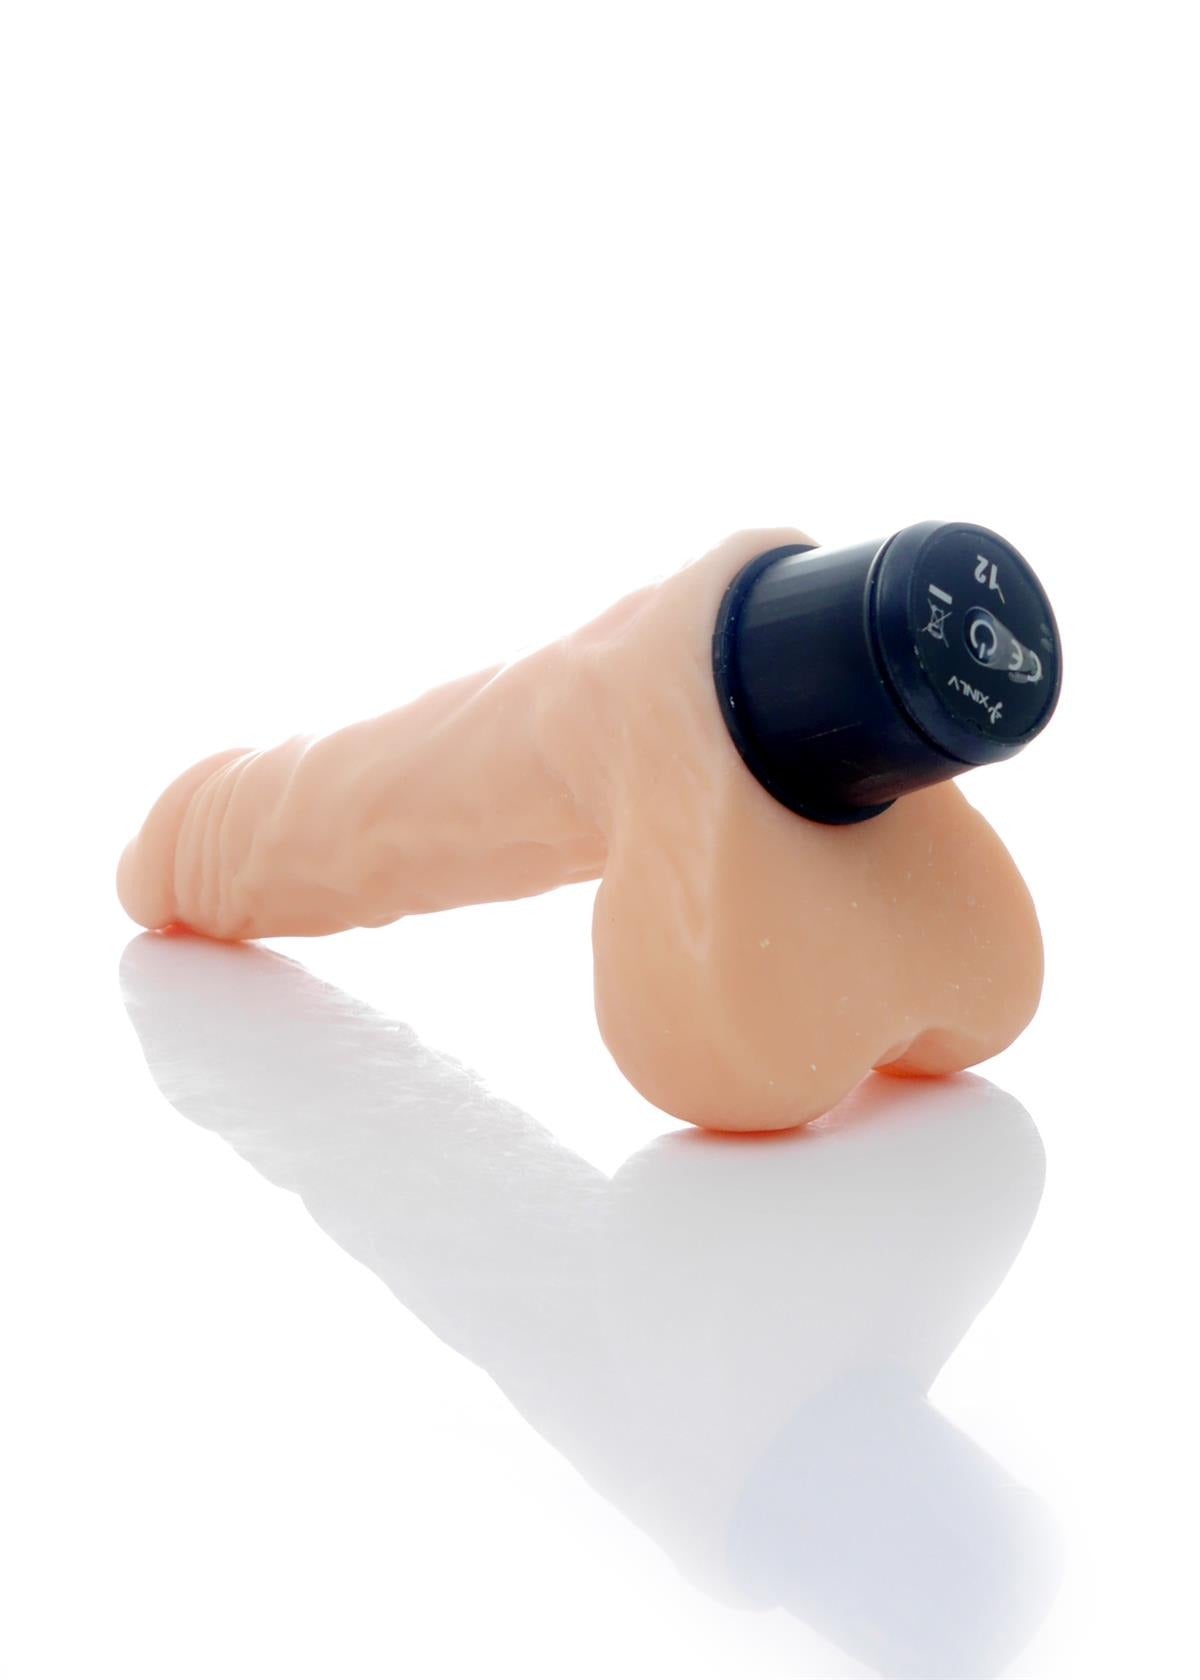 Bossoftoys Cyclone Realistic vibrator - 12 Function - Cyber leather - Extra ordinary Flexible Material - Flesh - 20,5 cm -44-00010